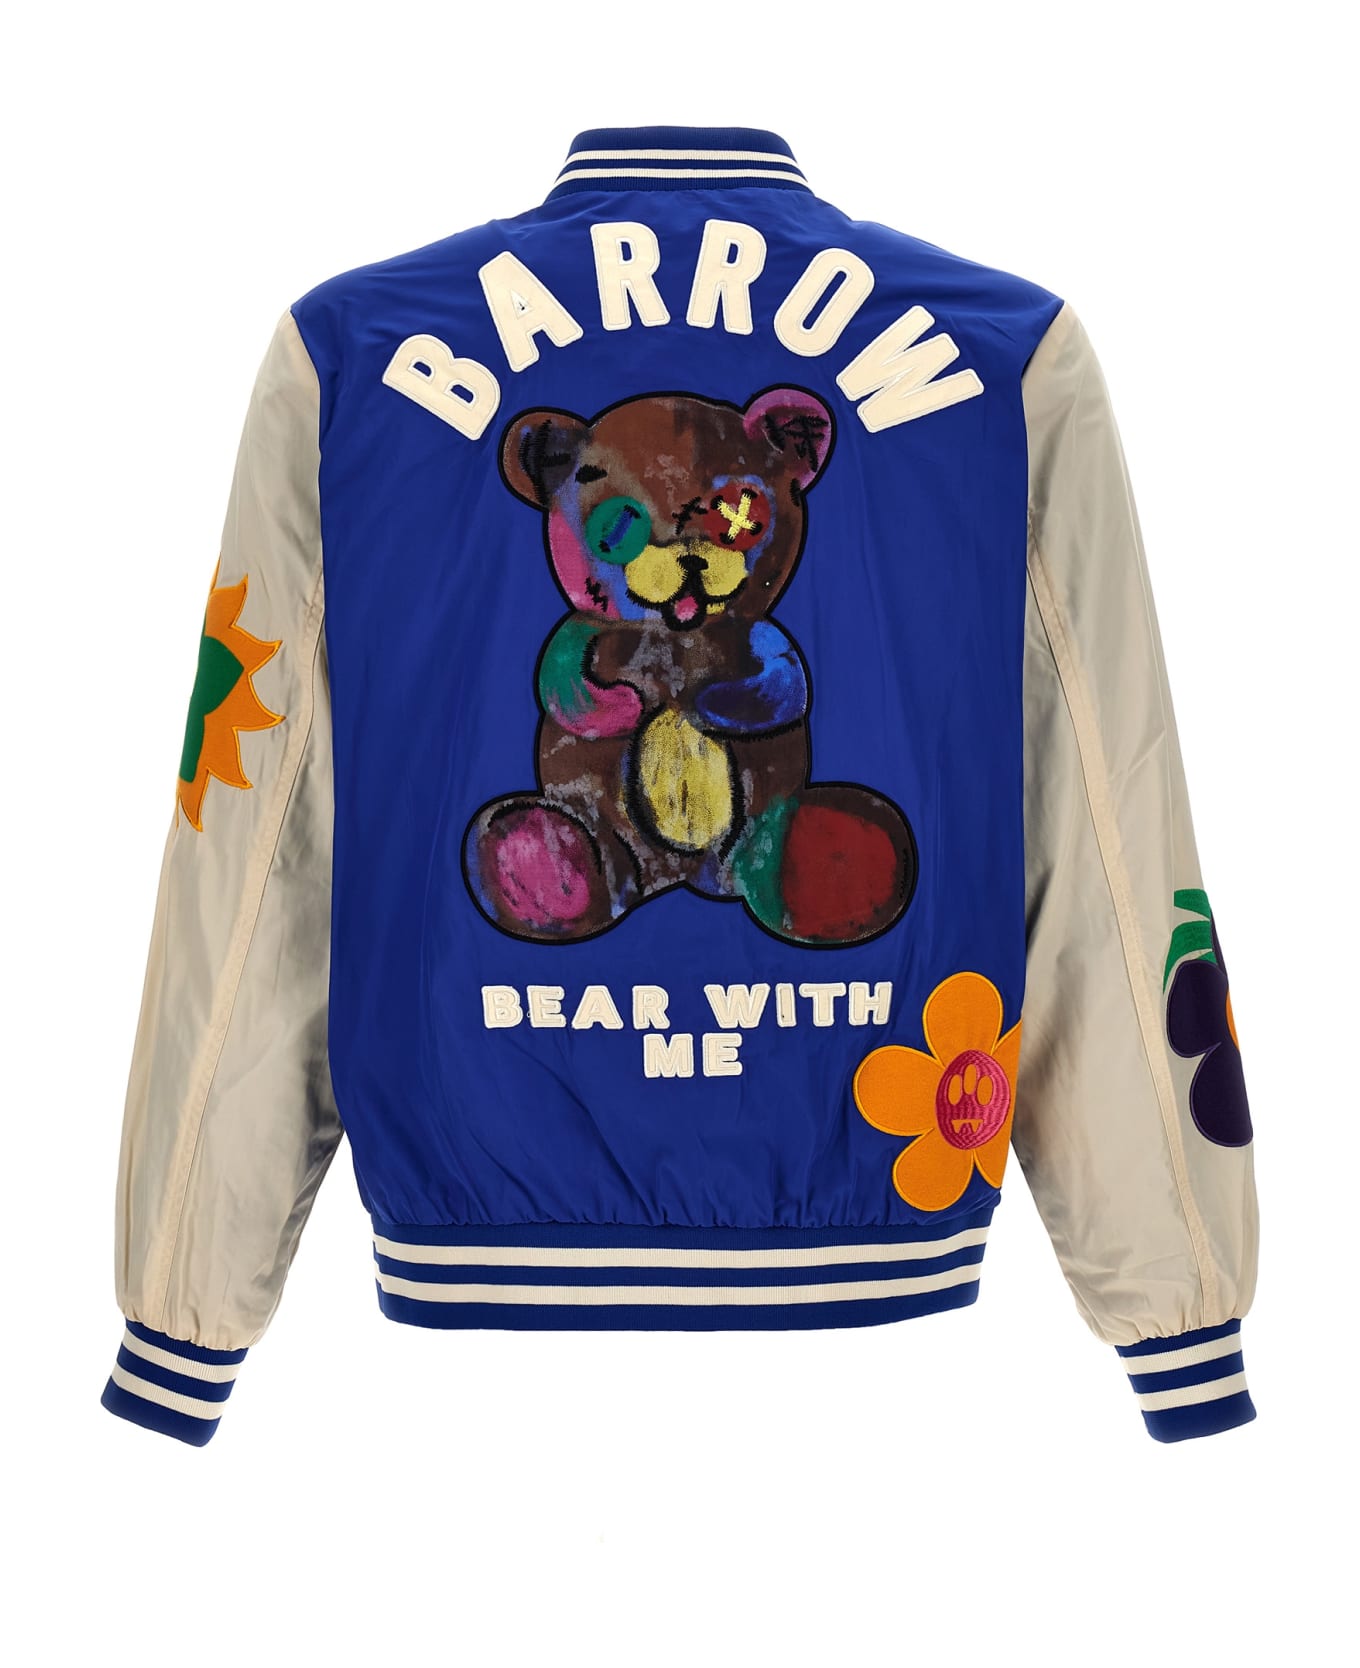 Barrow Embroidery Bomber Jacket And Patches - Multicolor ジャケット